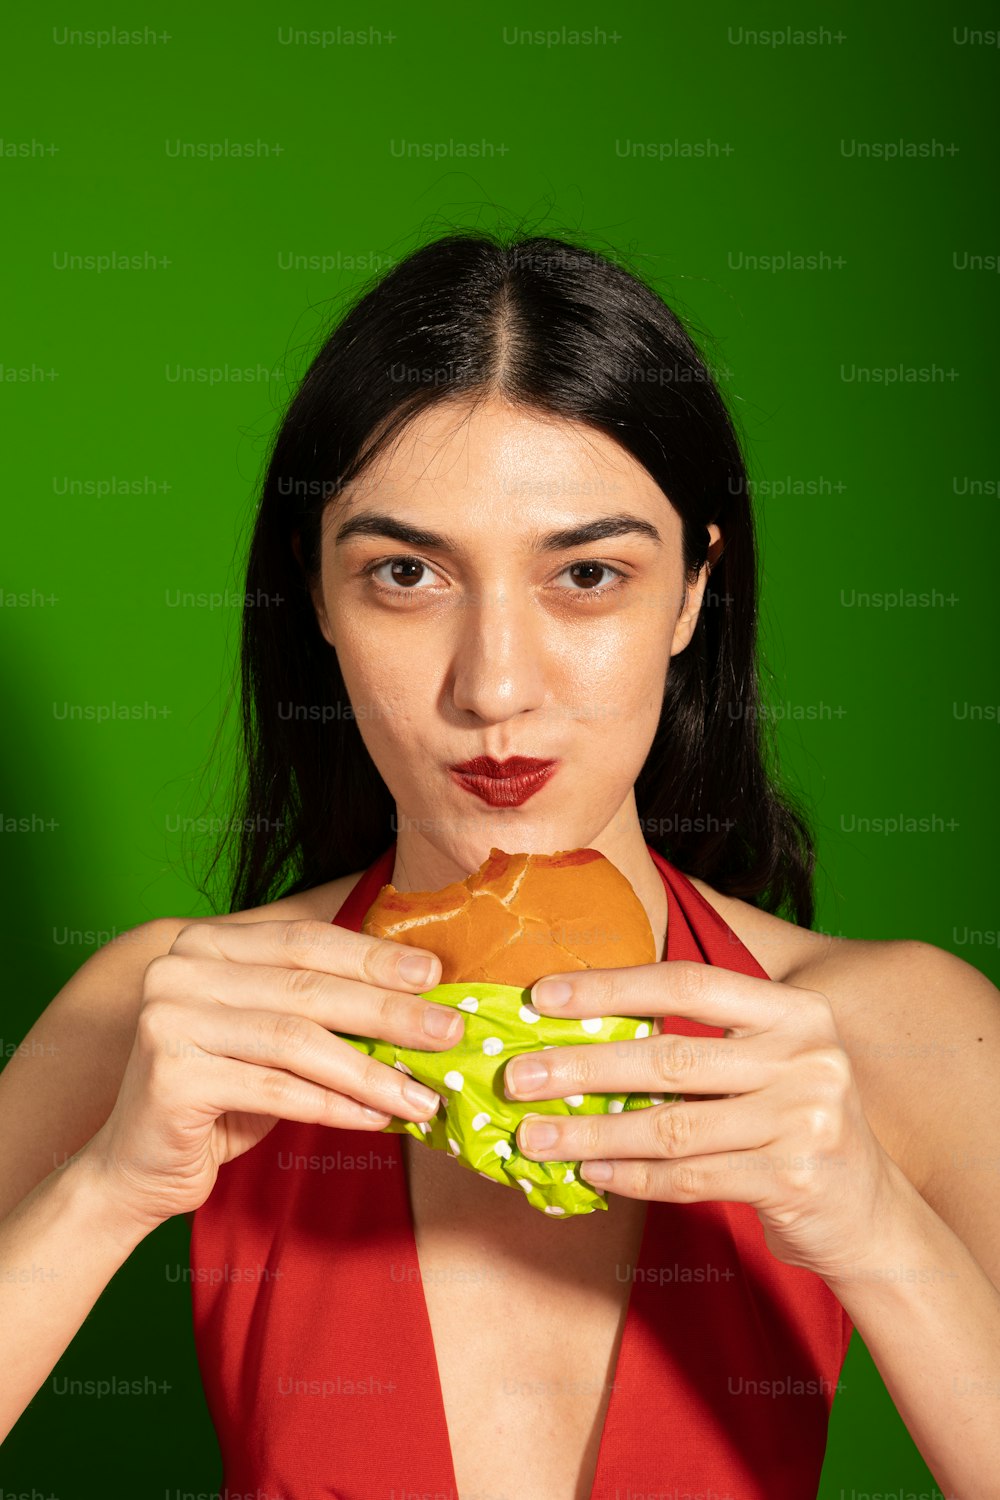 a woman in a red dress holding a sandwich